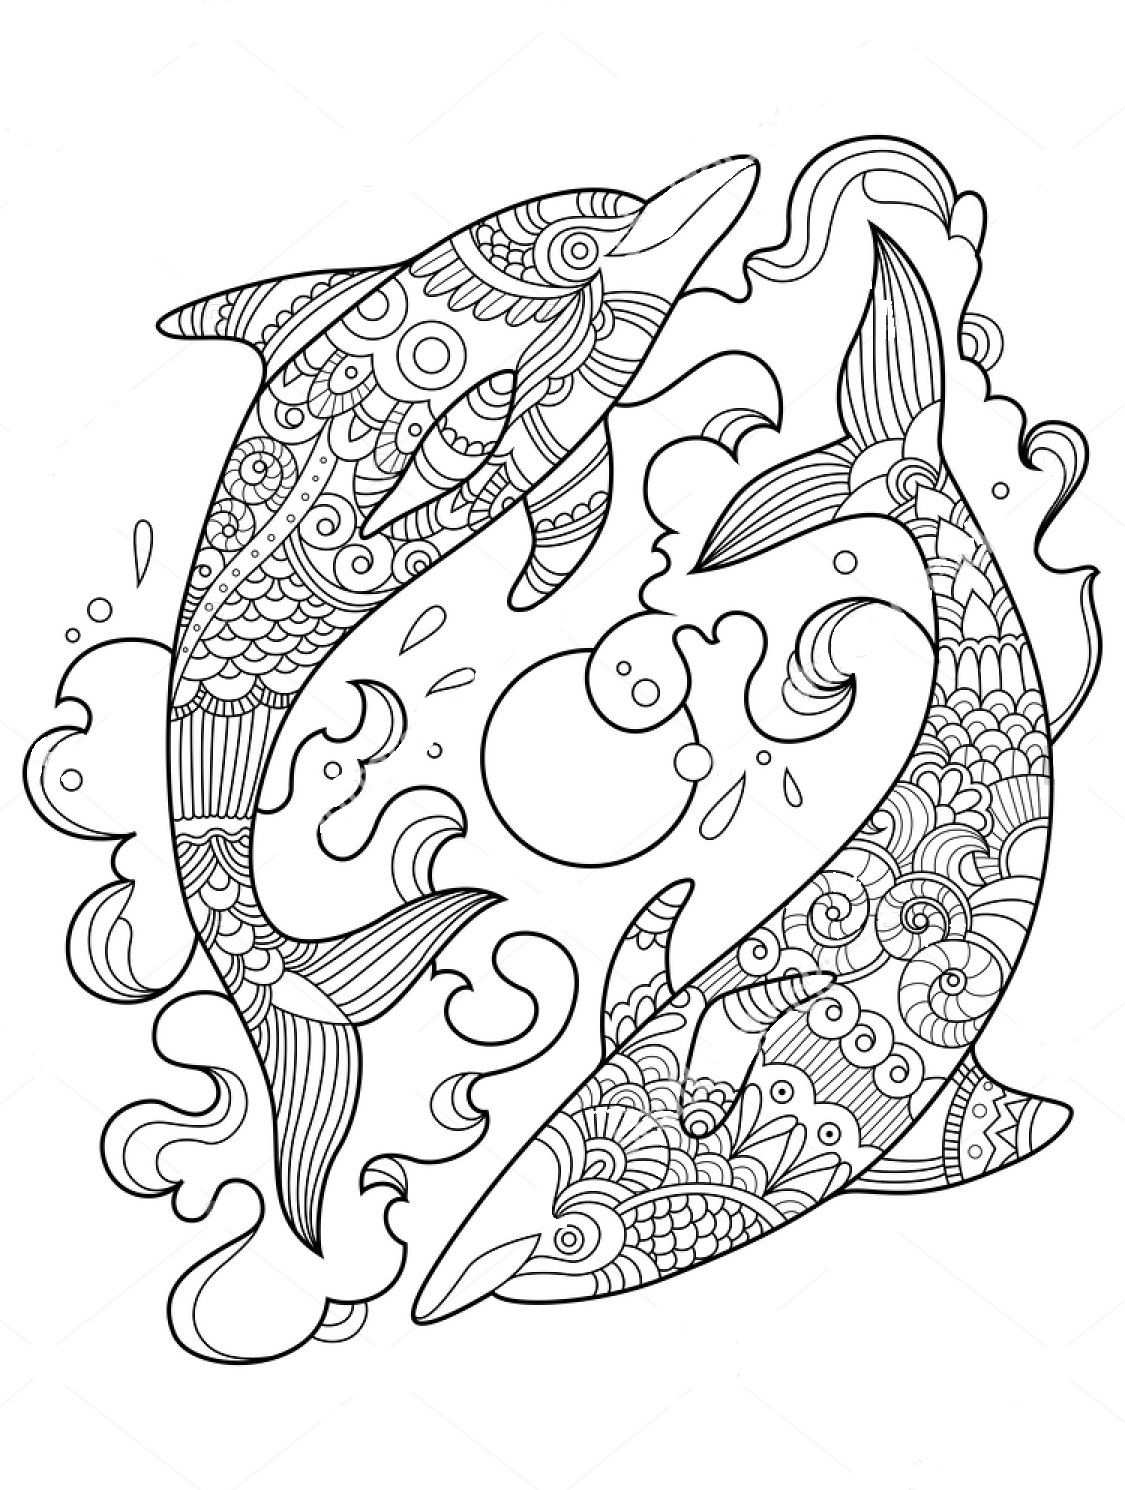 Dolphin Zentangle Coloring Page Dolphin Coloring Pages Animal